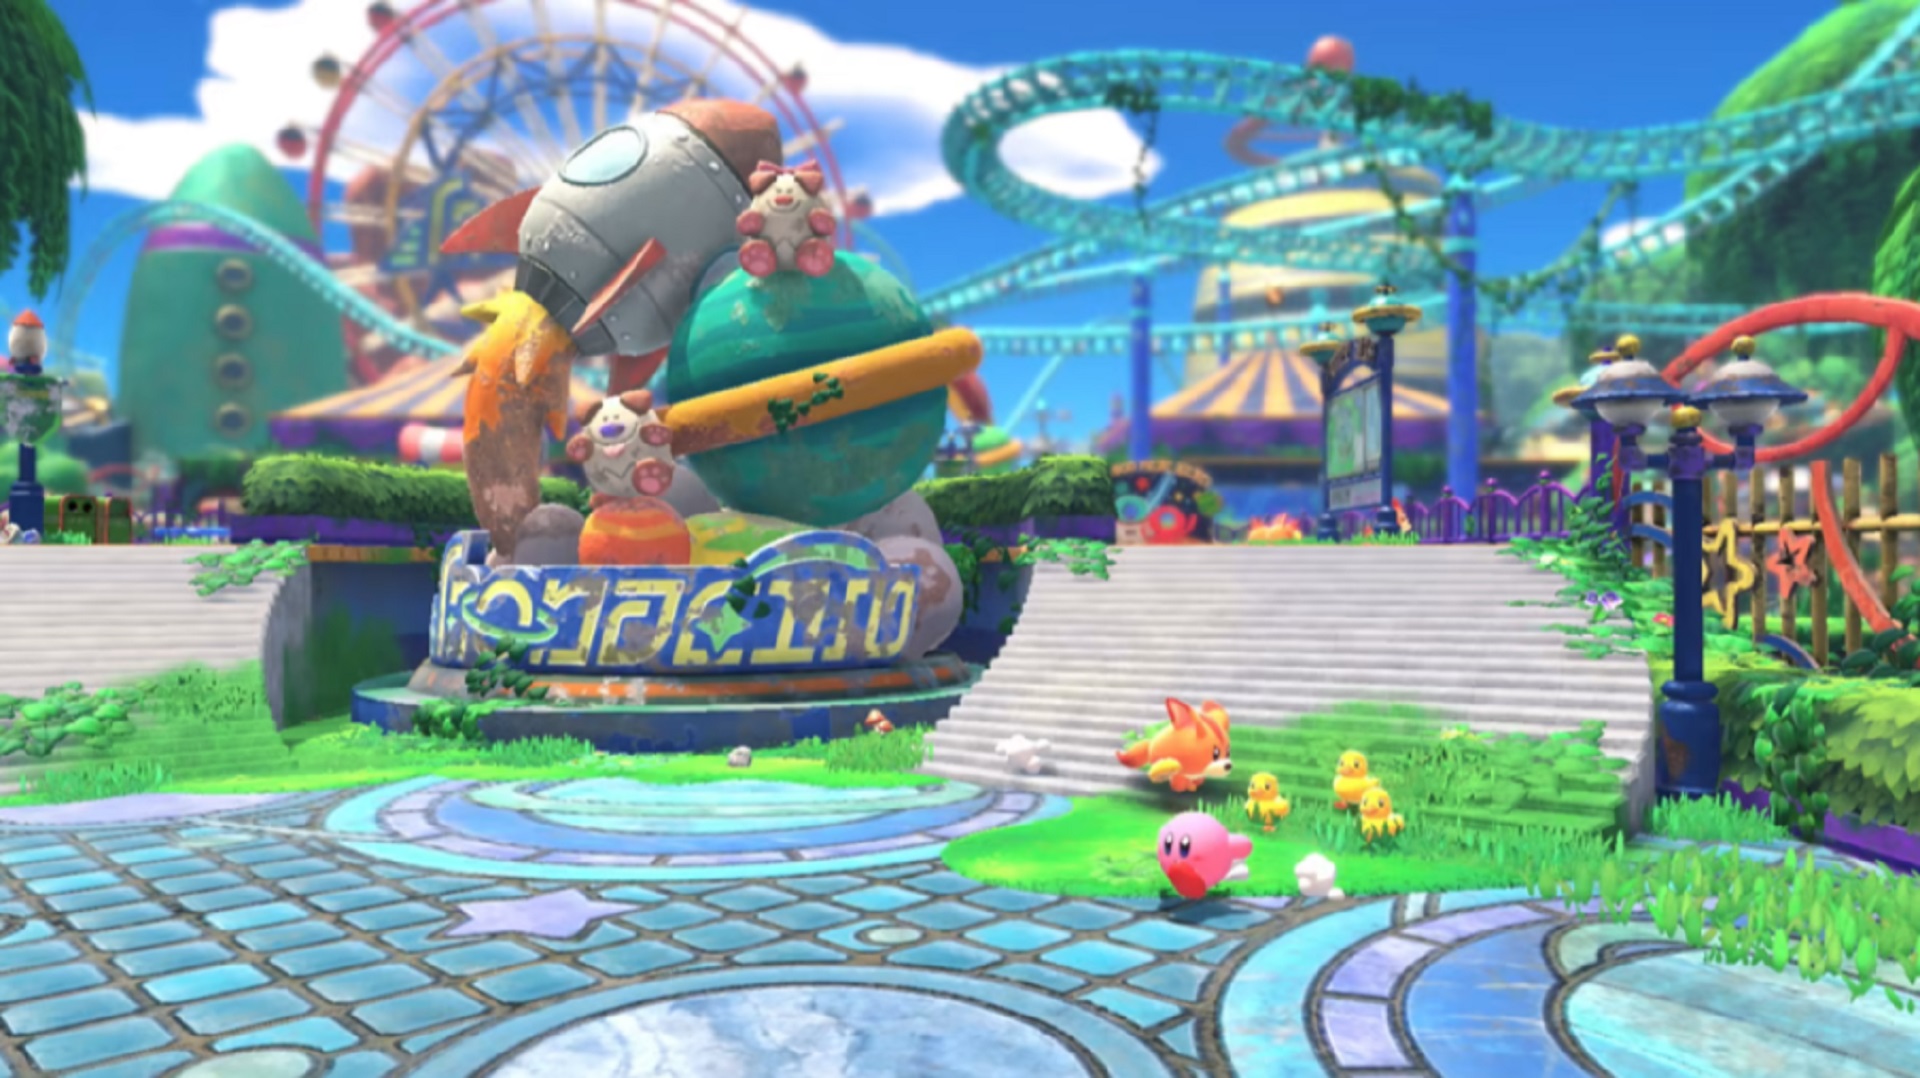 Kirby and the Forgotten Land - kirby walks by a welcome sign for an amusement park